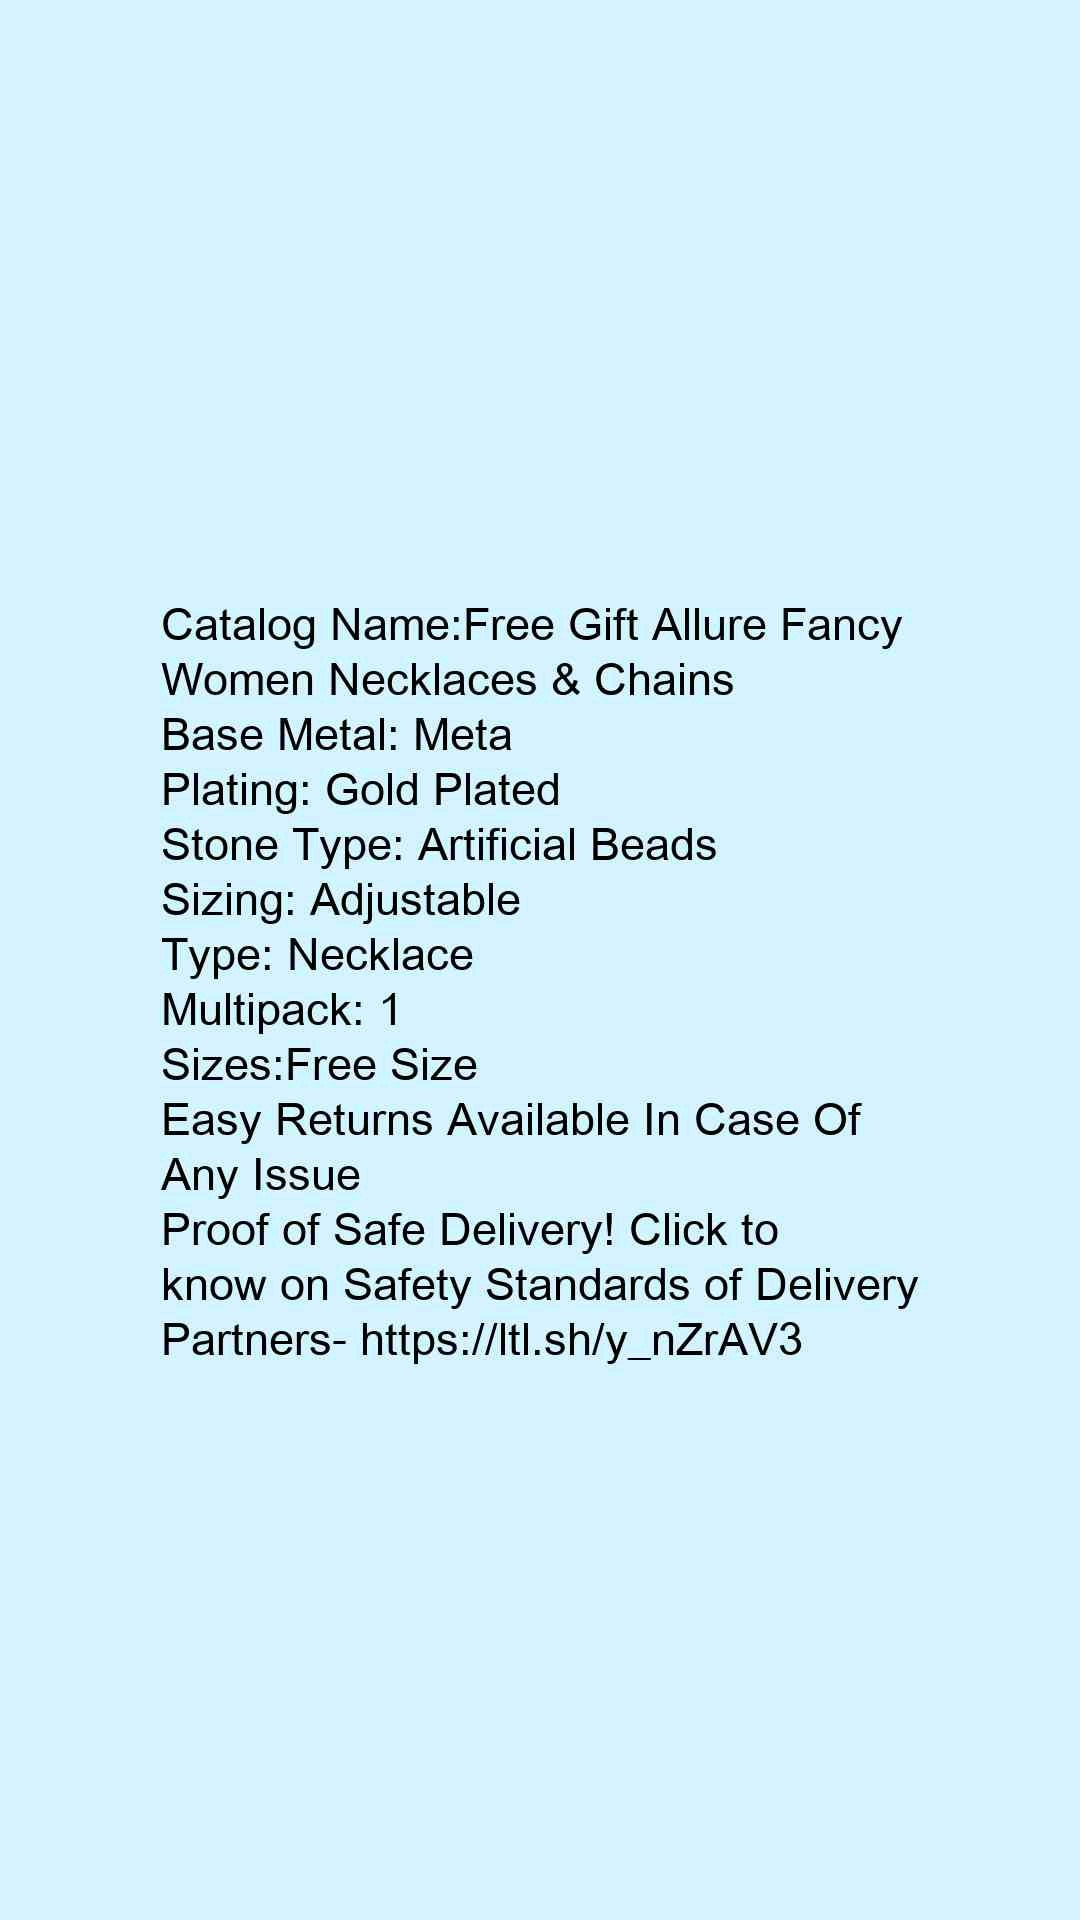 Free Gift Allure Fancy Women Necklaces & Chains